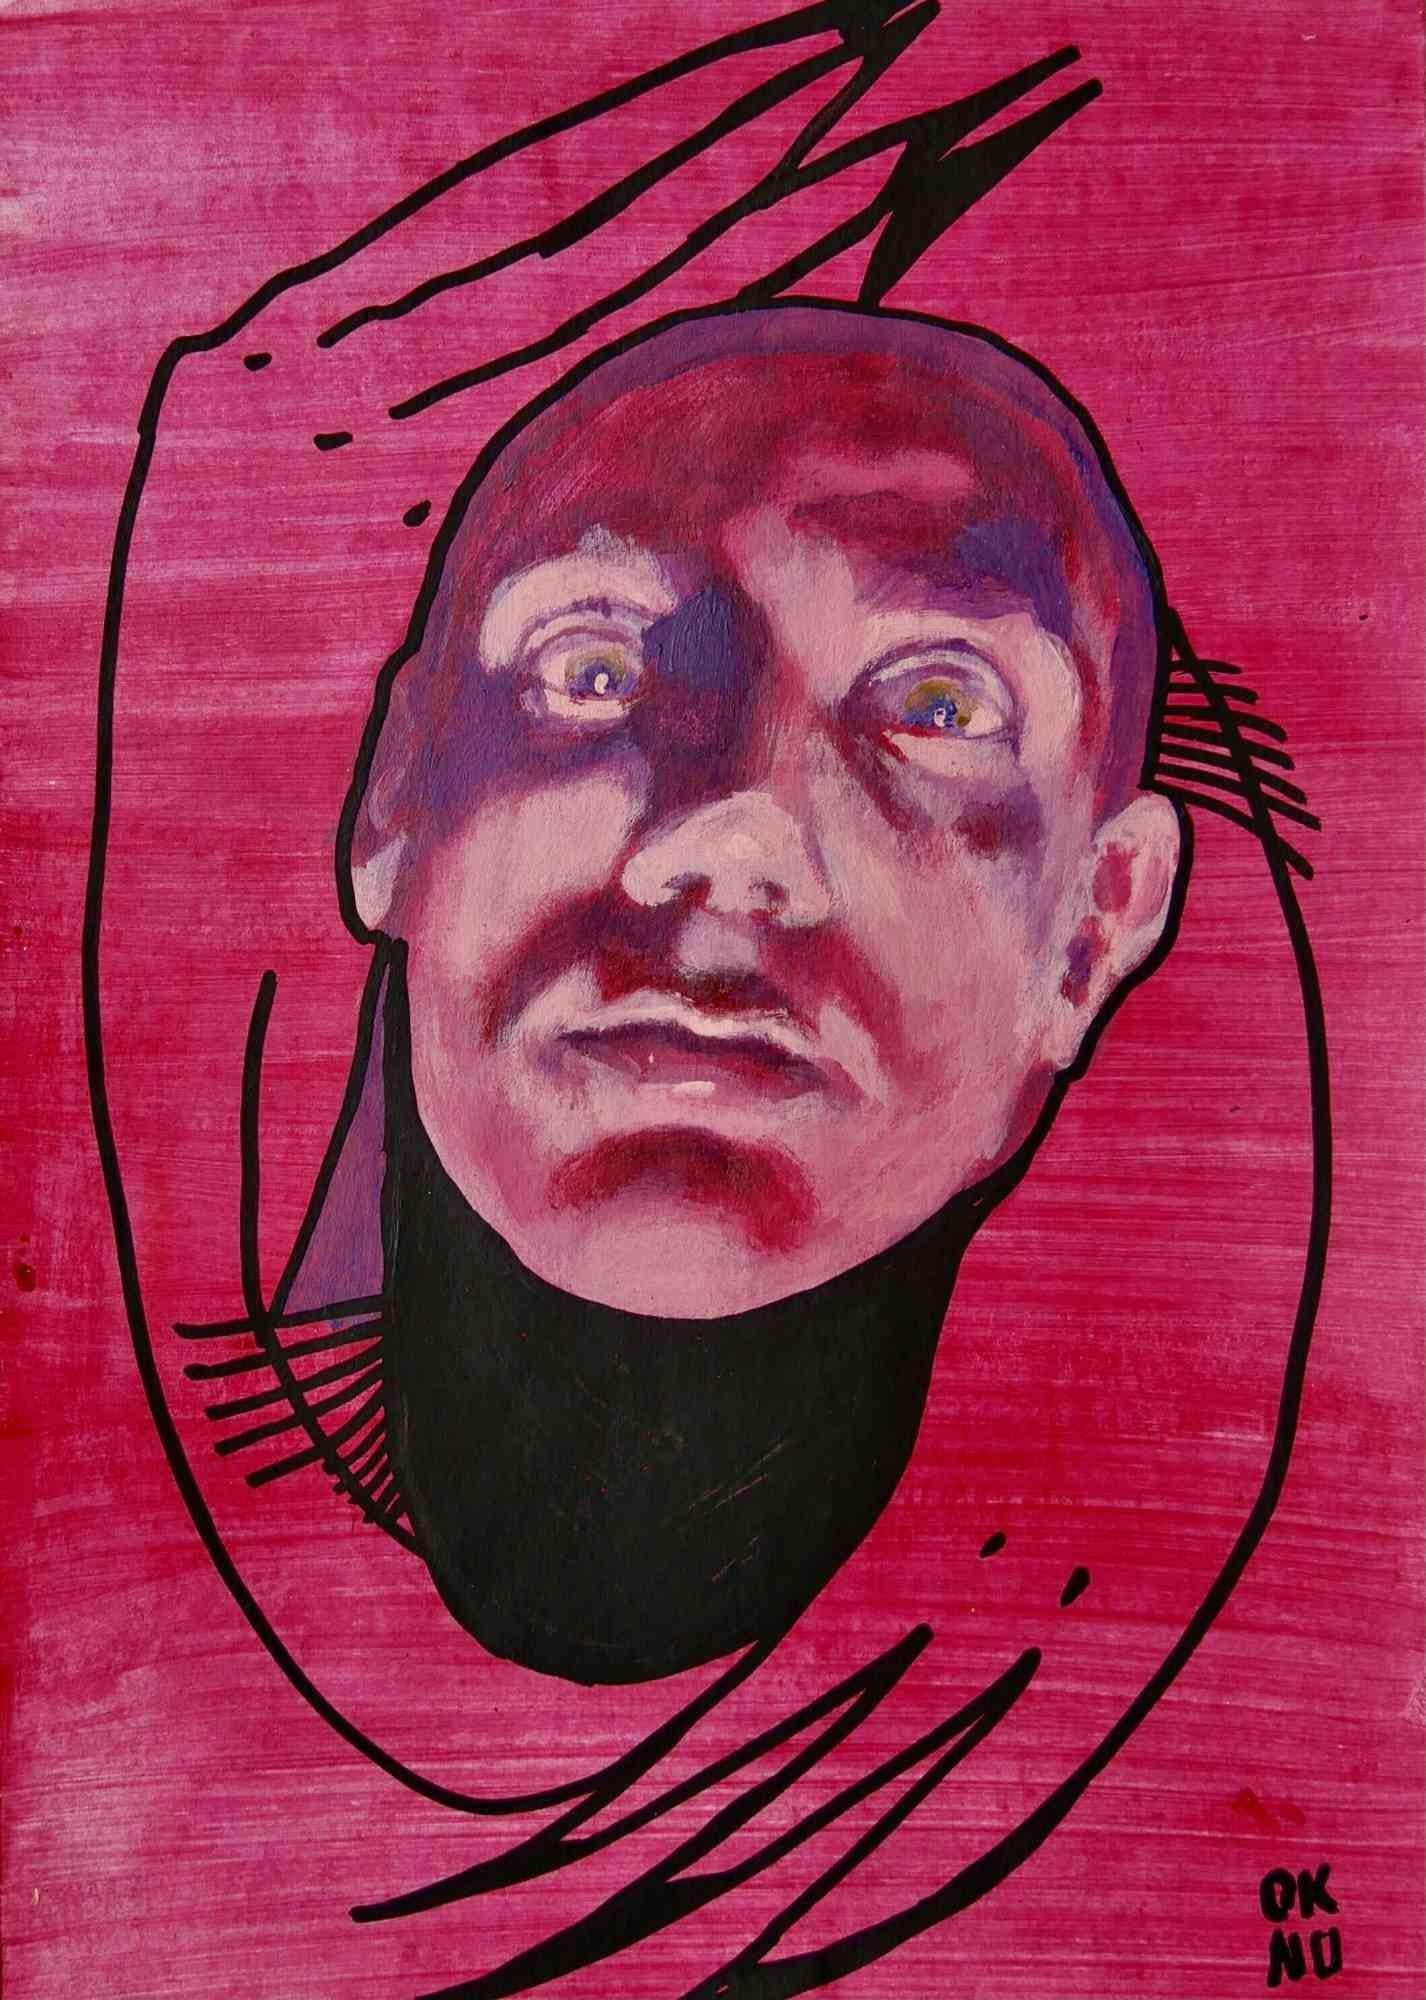 "What's ahead (3)" is a painting made by Ukrainian artist Okno in 2023.

Acrylic and marker on drawing paper. Signed by hand. Excellent condition.

The work is part of the artist's studies on paper. The study focuses on the chiaroscuro that is